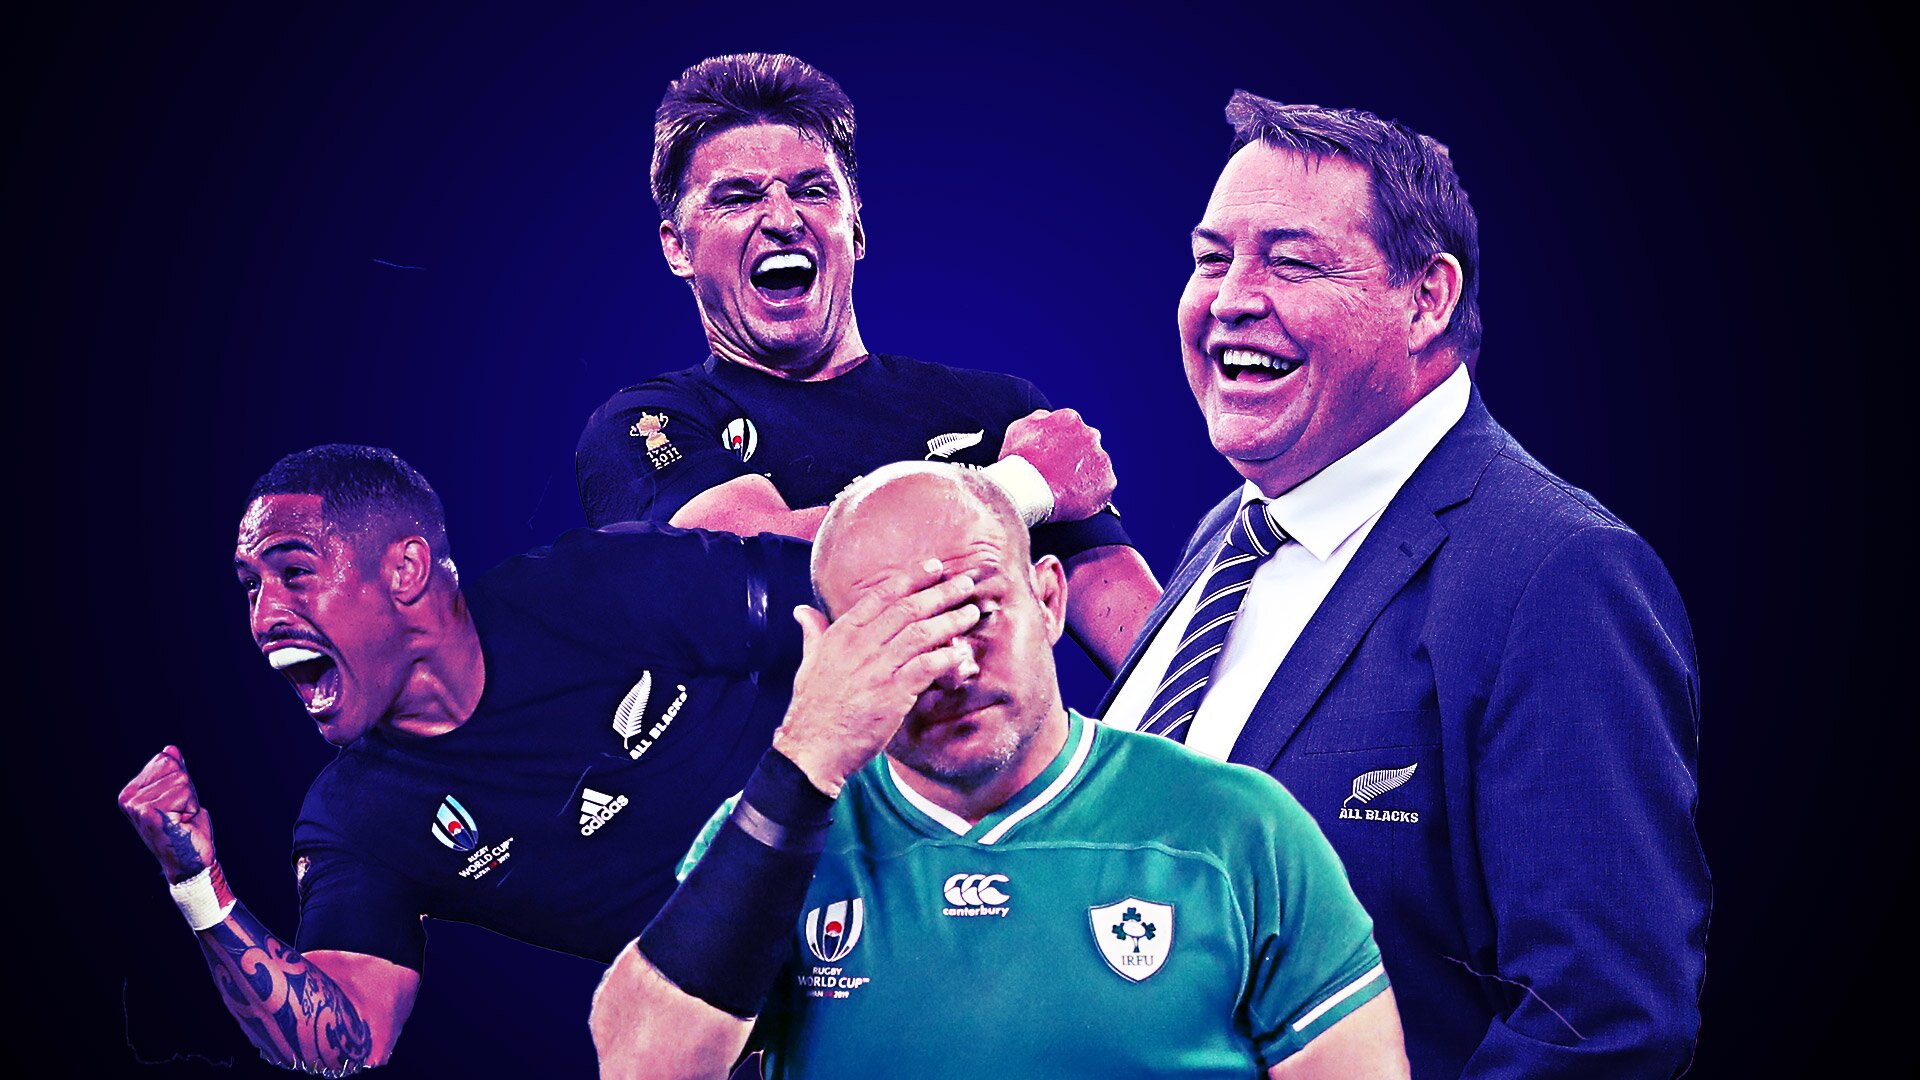 Analysis: Irish con-job complete? The All Blacks' top-draw performance makes compelling evidence for shelved tactics last year